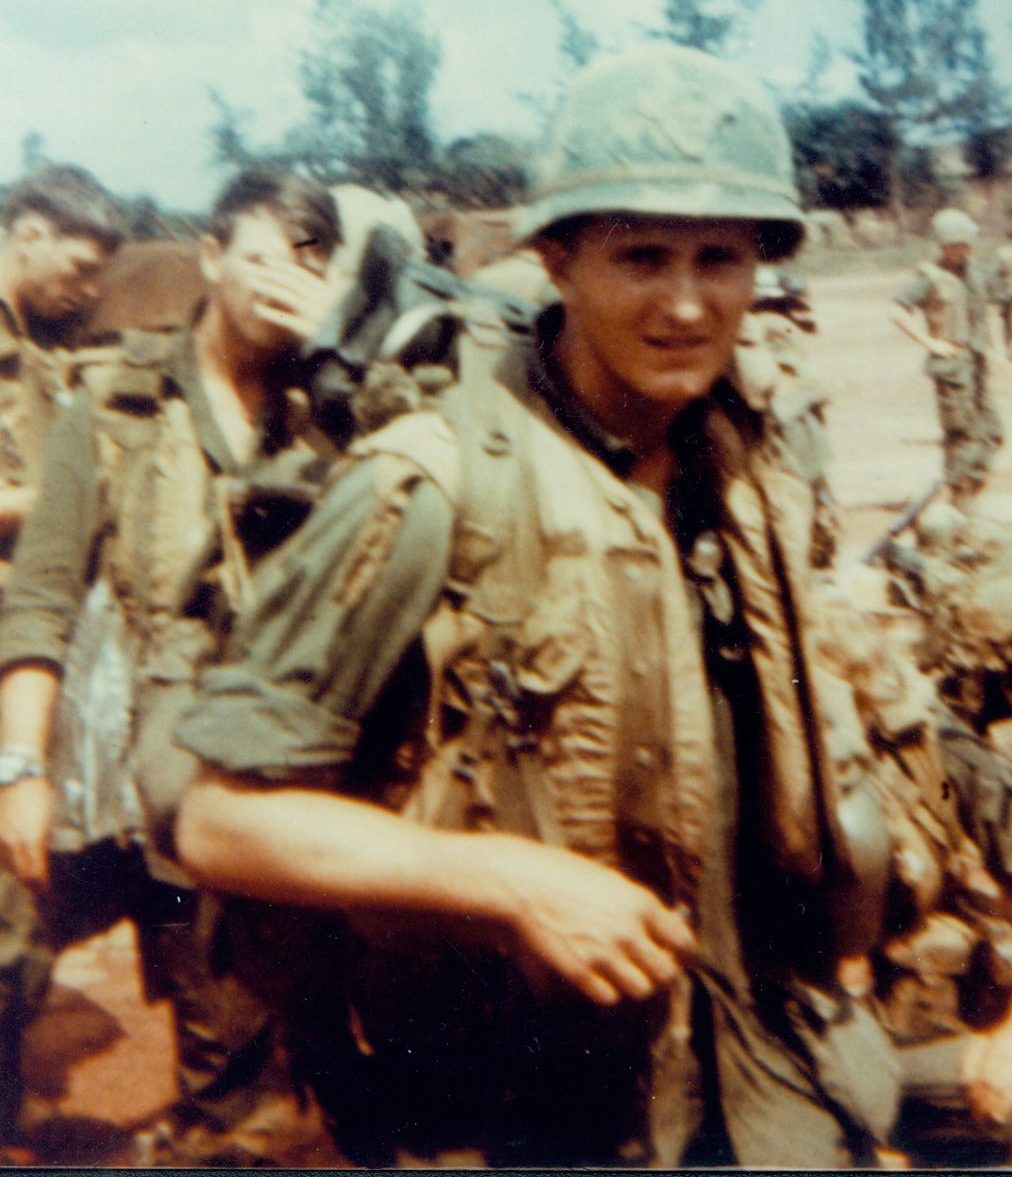 GI marching with full gear on, Vietnam War